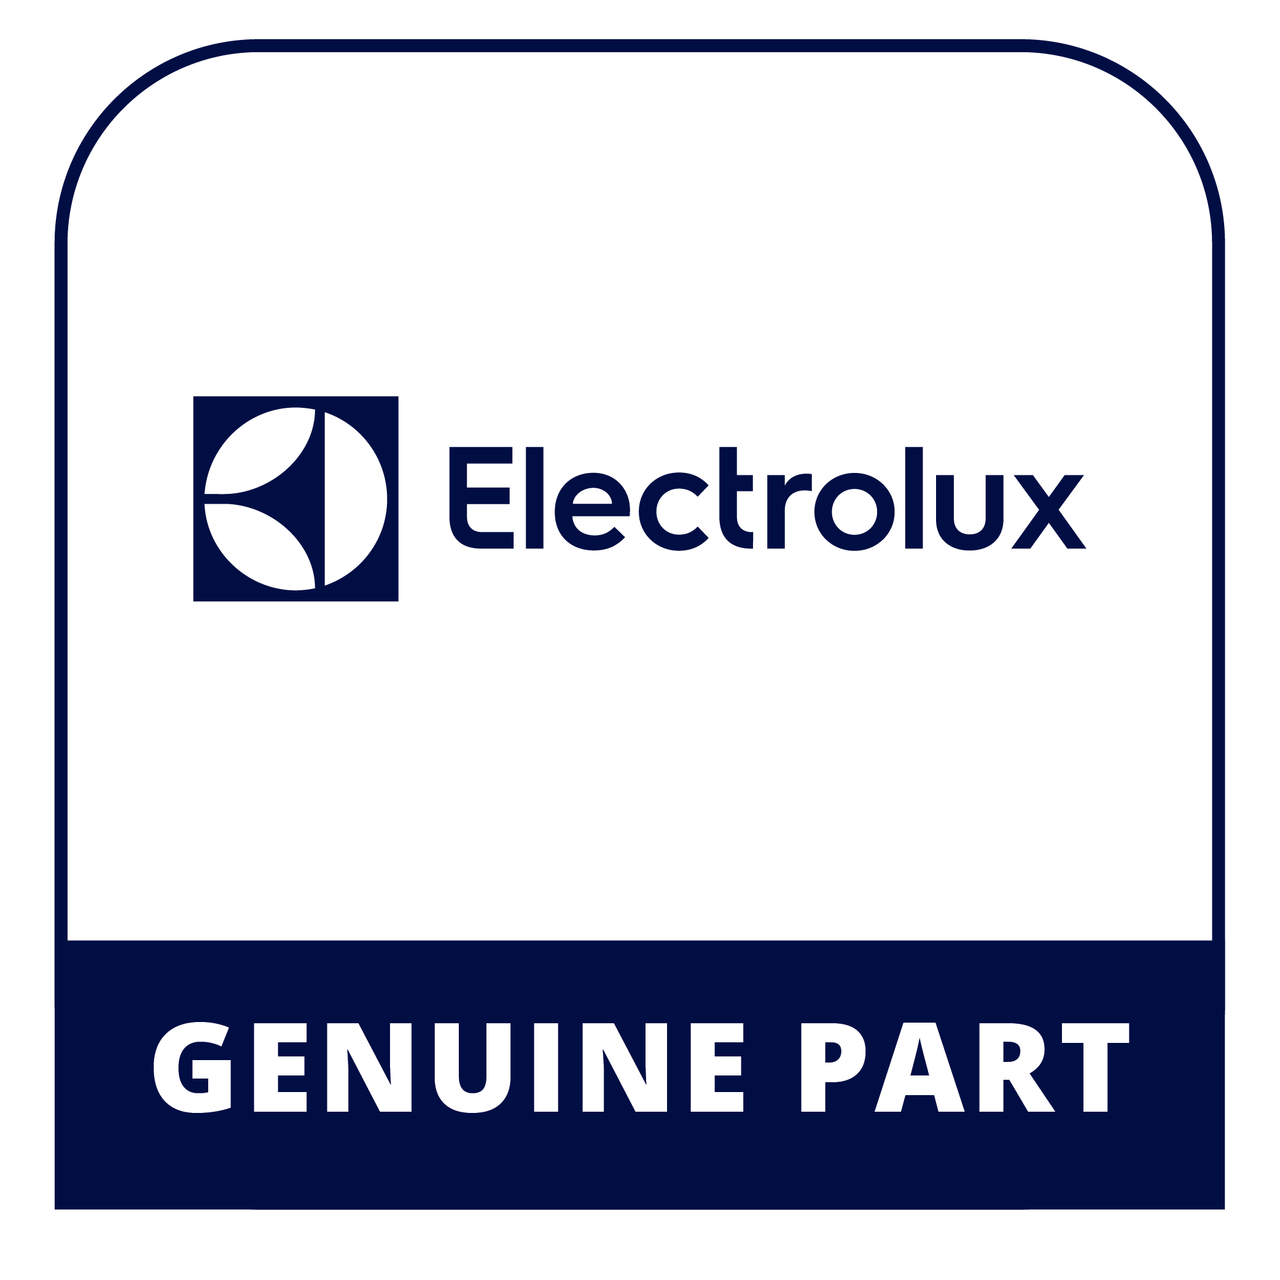 Frigidaire - Electrolux 316902212 Owners Guide - Genuine Electrolux Part